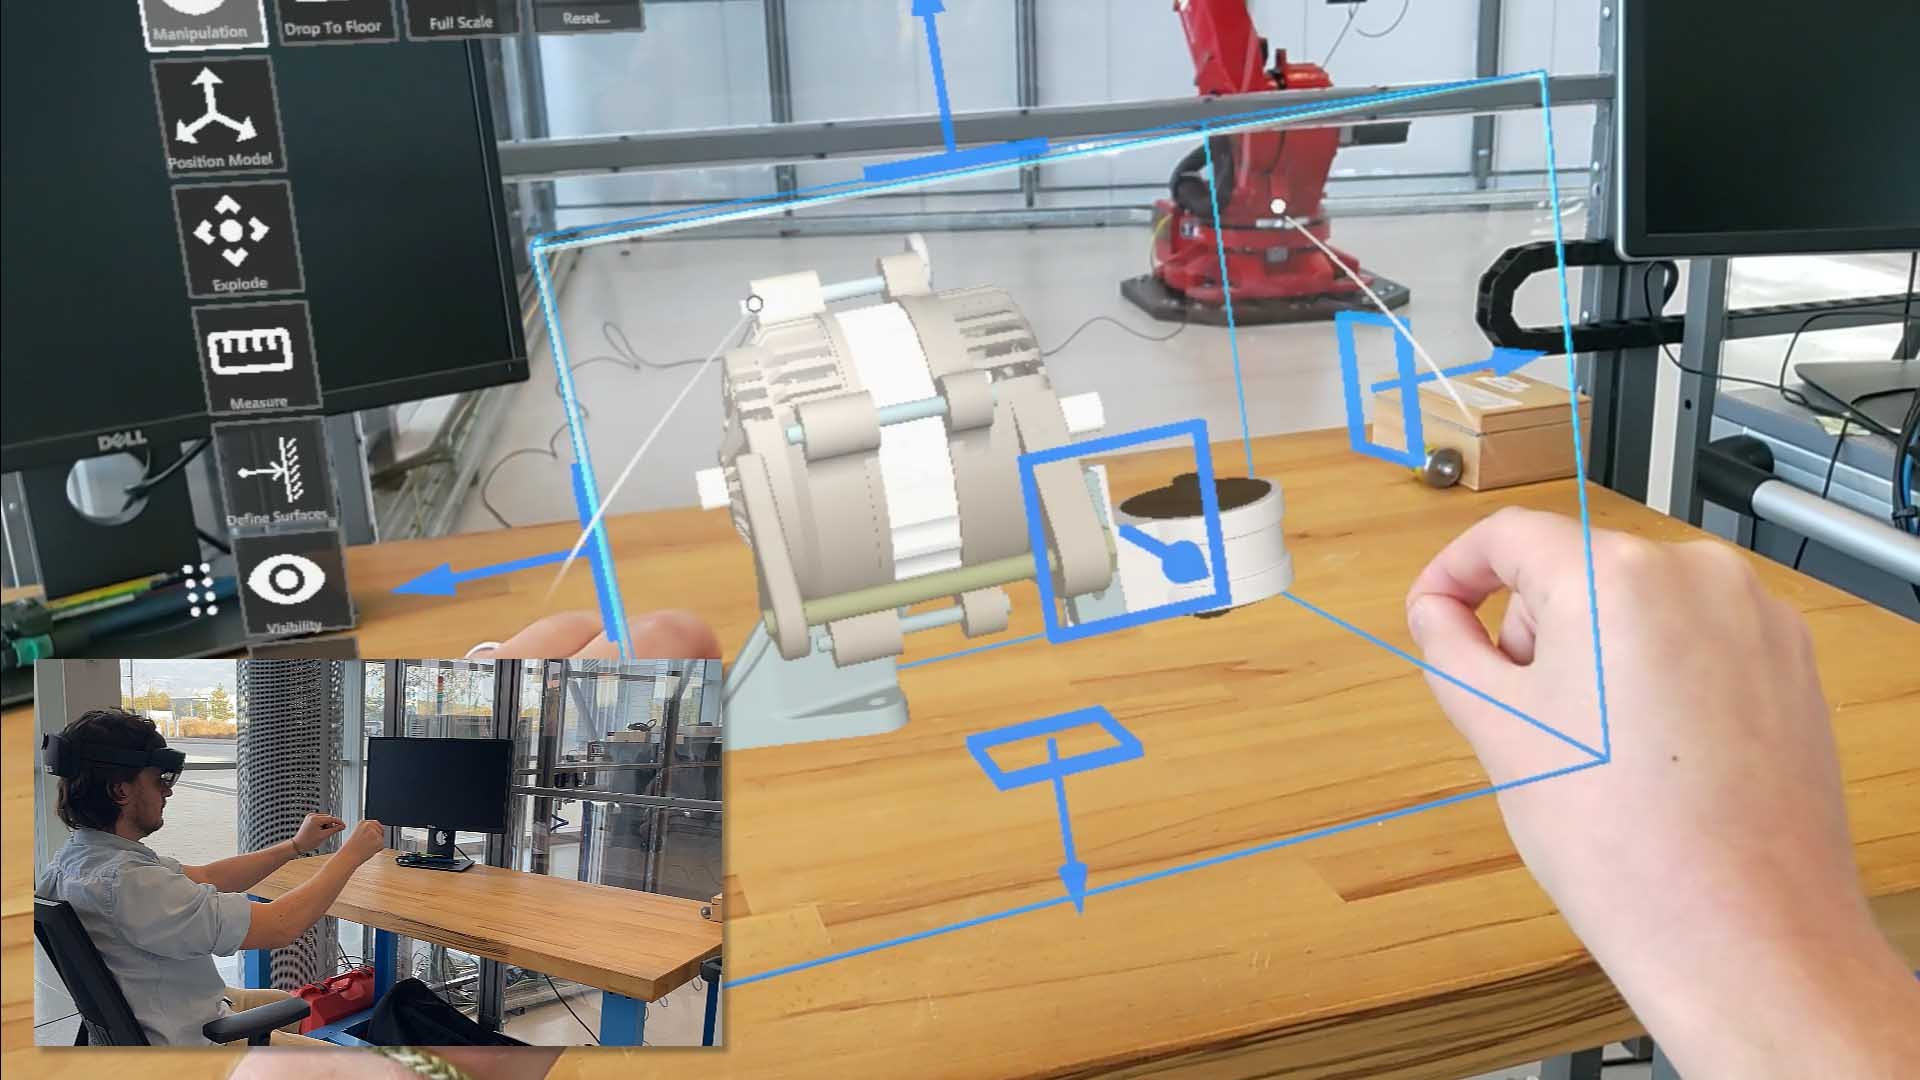 Full scale visualization using HoloLens 2 Mixed Reality